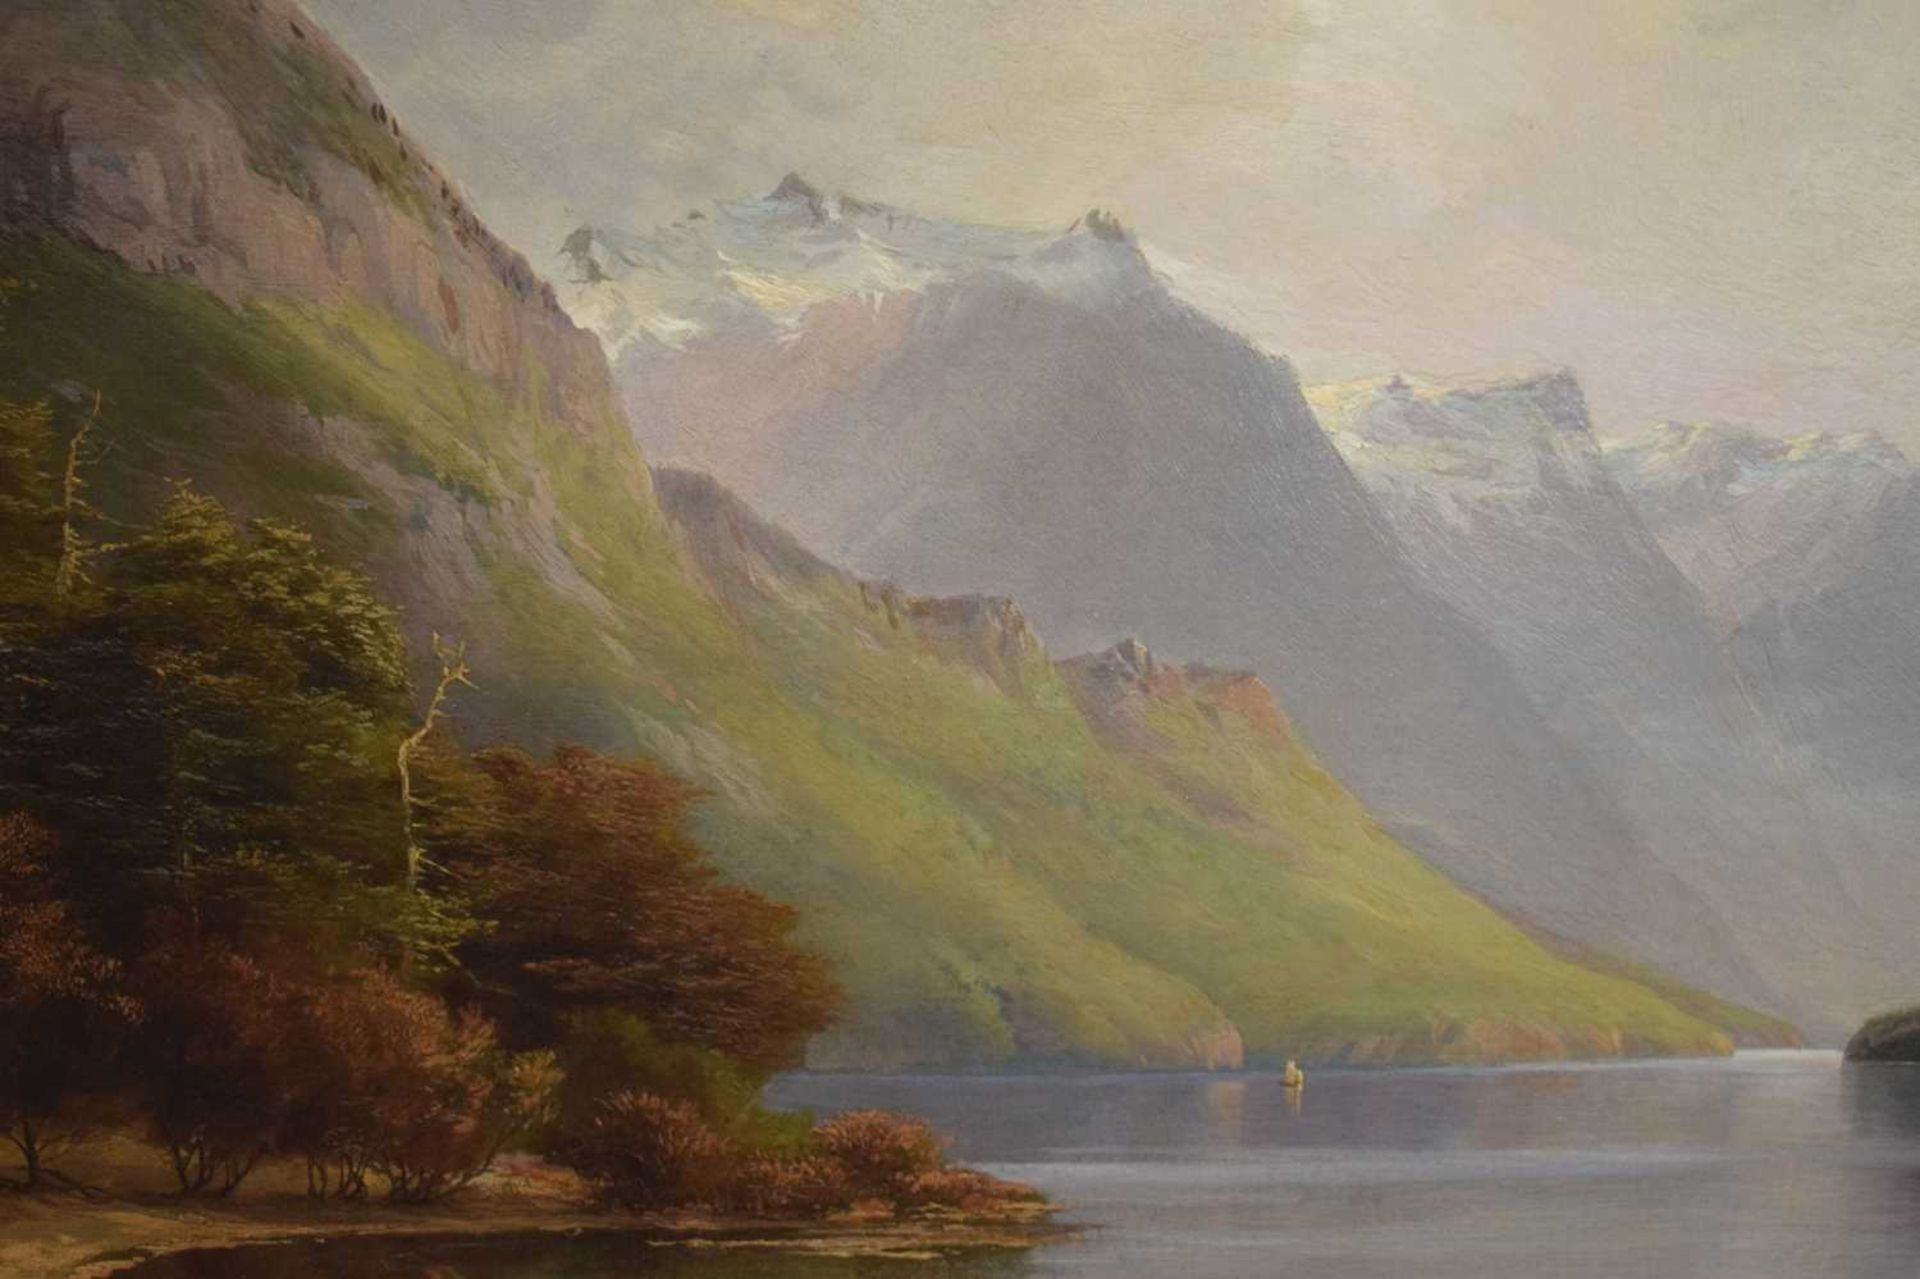 Nicholas Chevalier - New Zealand oil on canvas - Lake Manapouri - Image 8 of 16